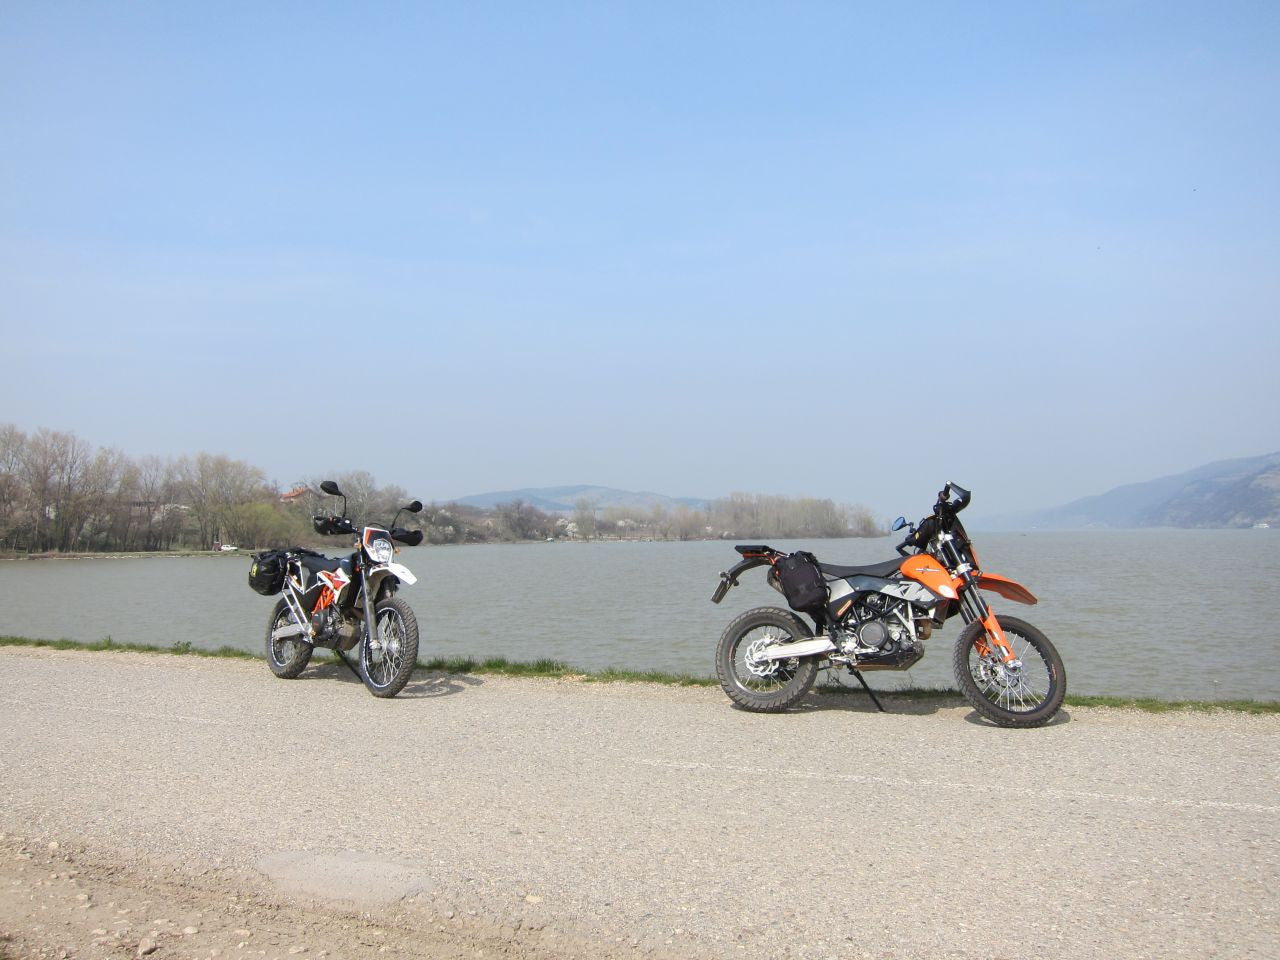 Ride pictures - March 2016. - Djerdap, Serbia